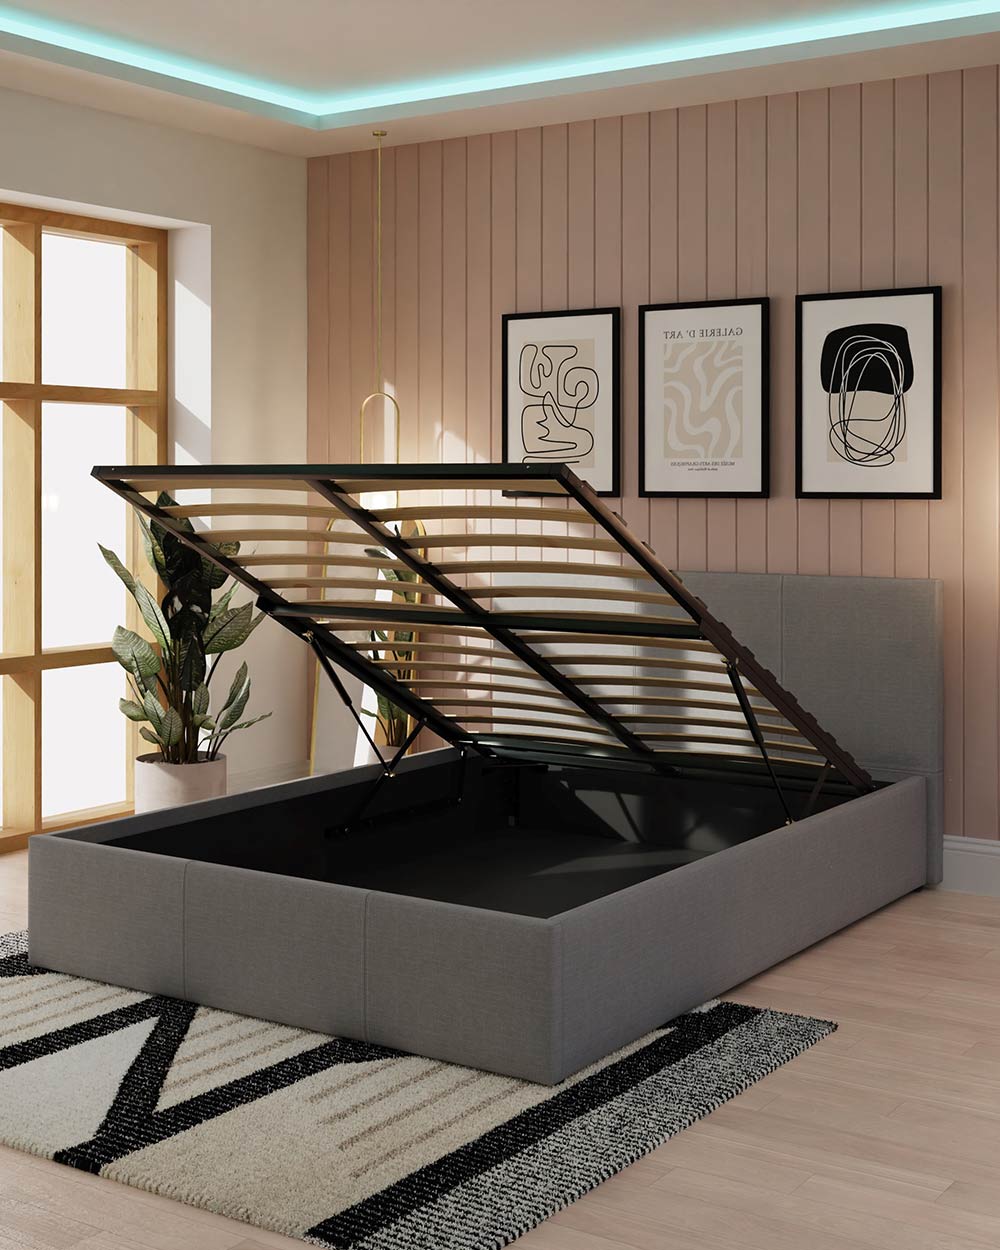 end lift ottoman bed lifestyle of the bed lifting up